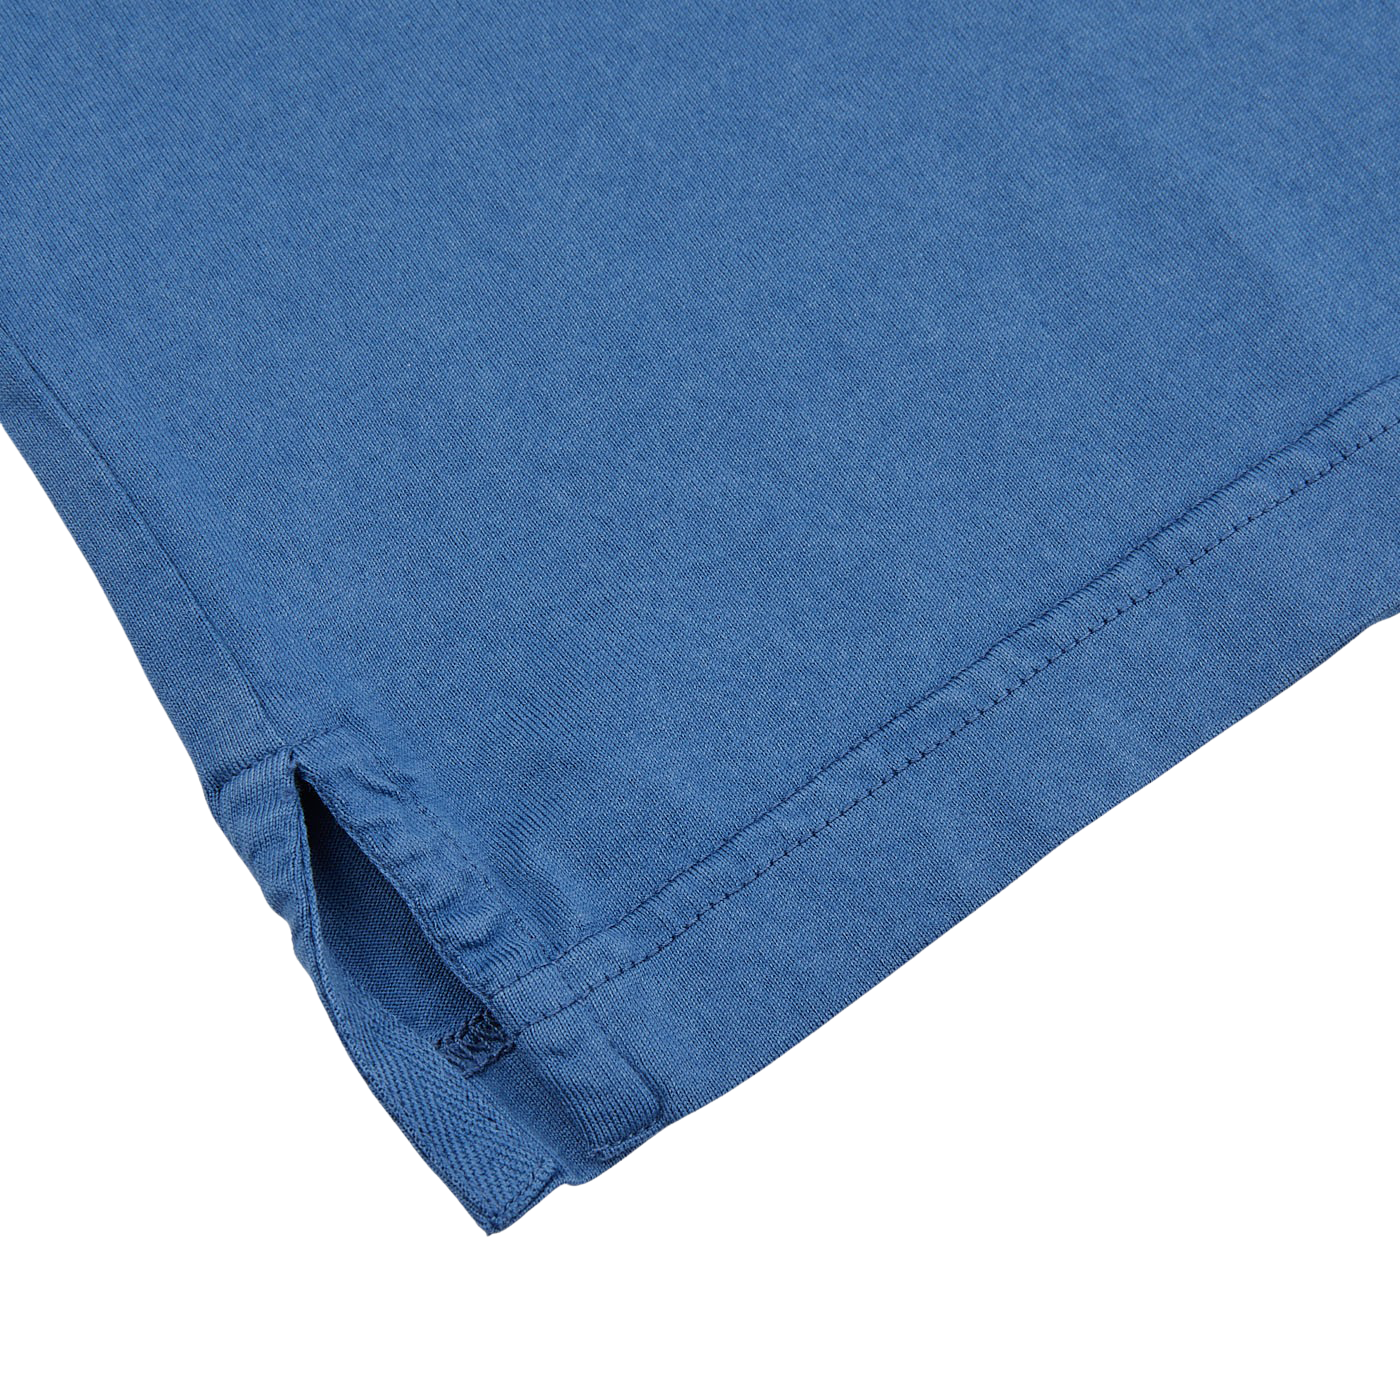 A close up of a luxurious Light Blue Organic Cotton LS Polo Shirt by Fedeli.